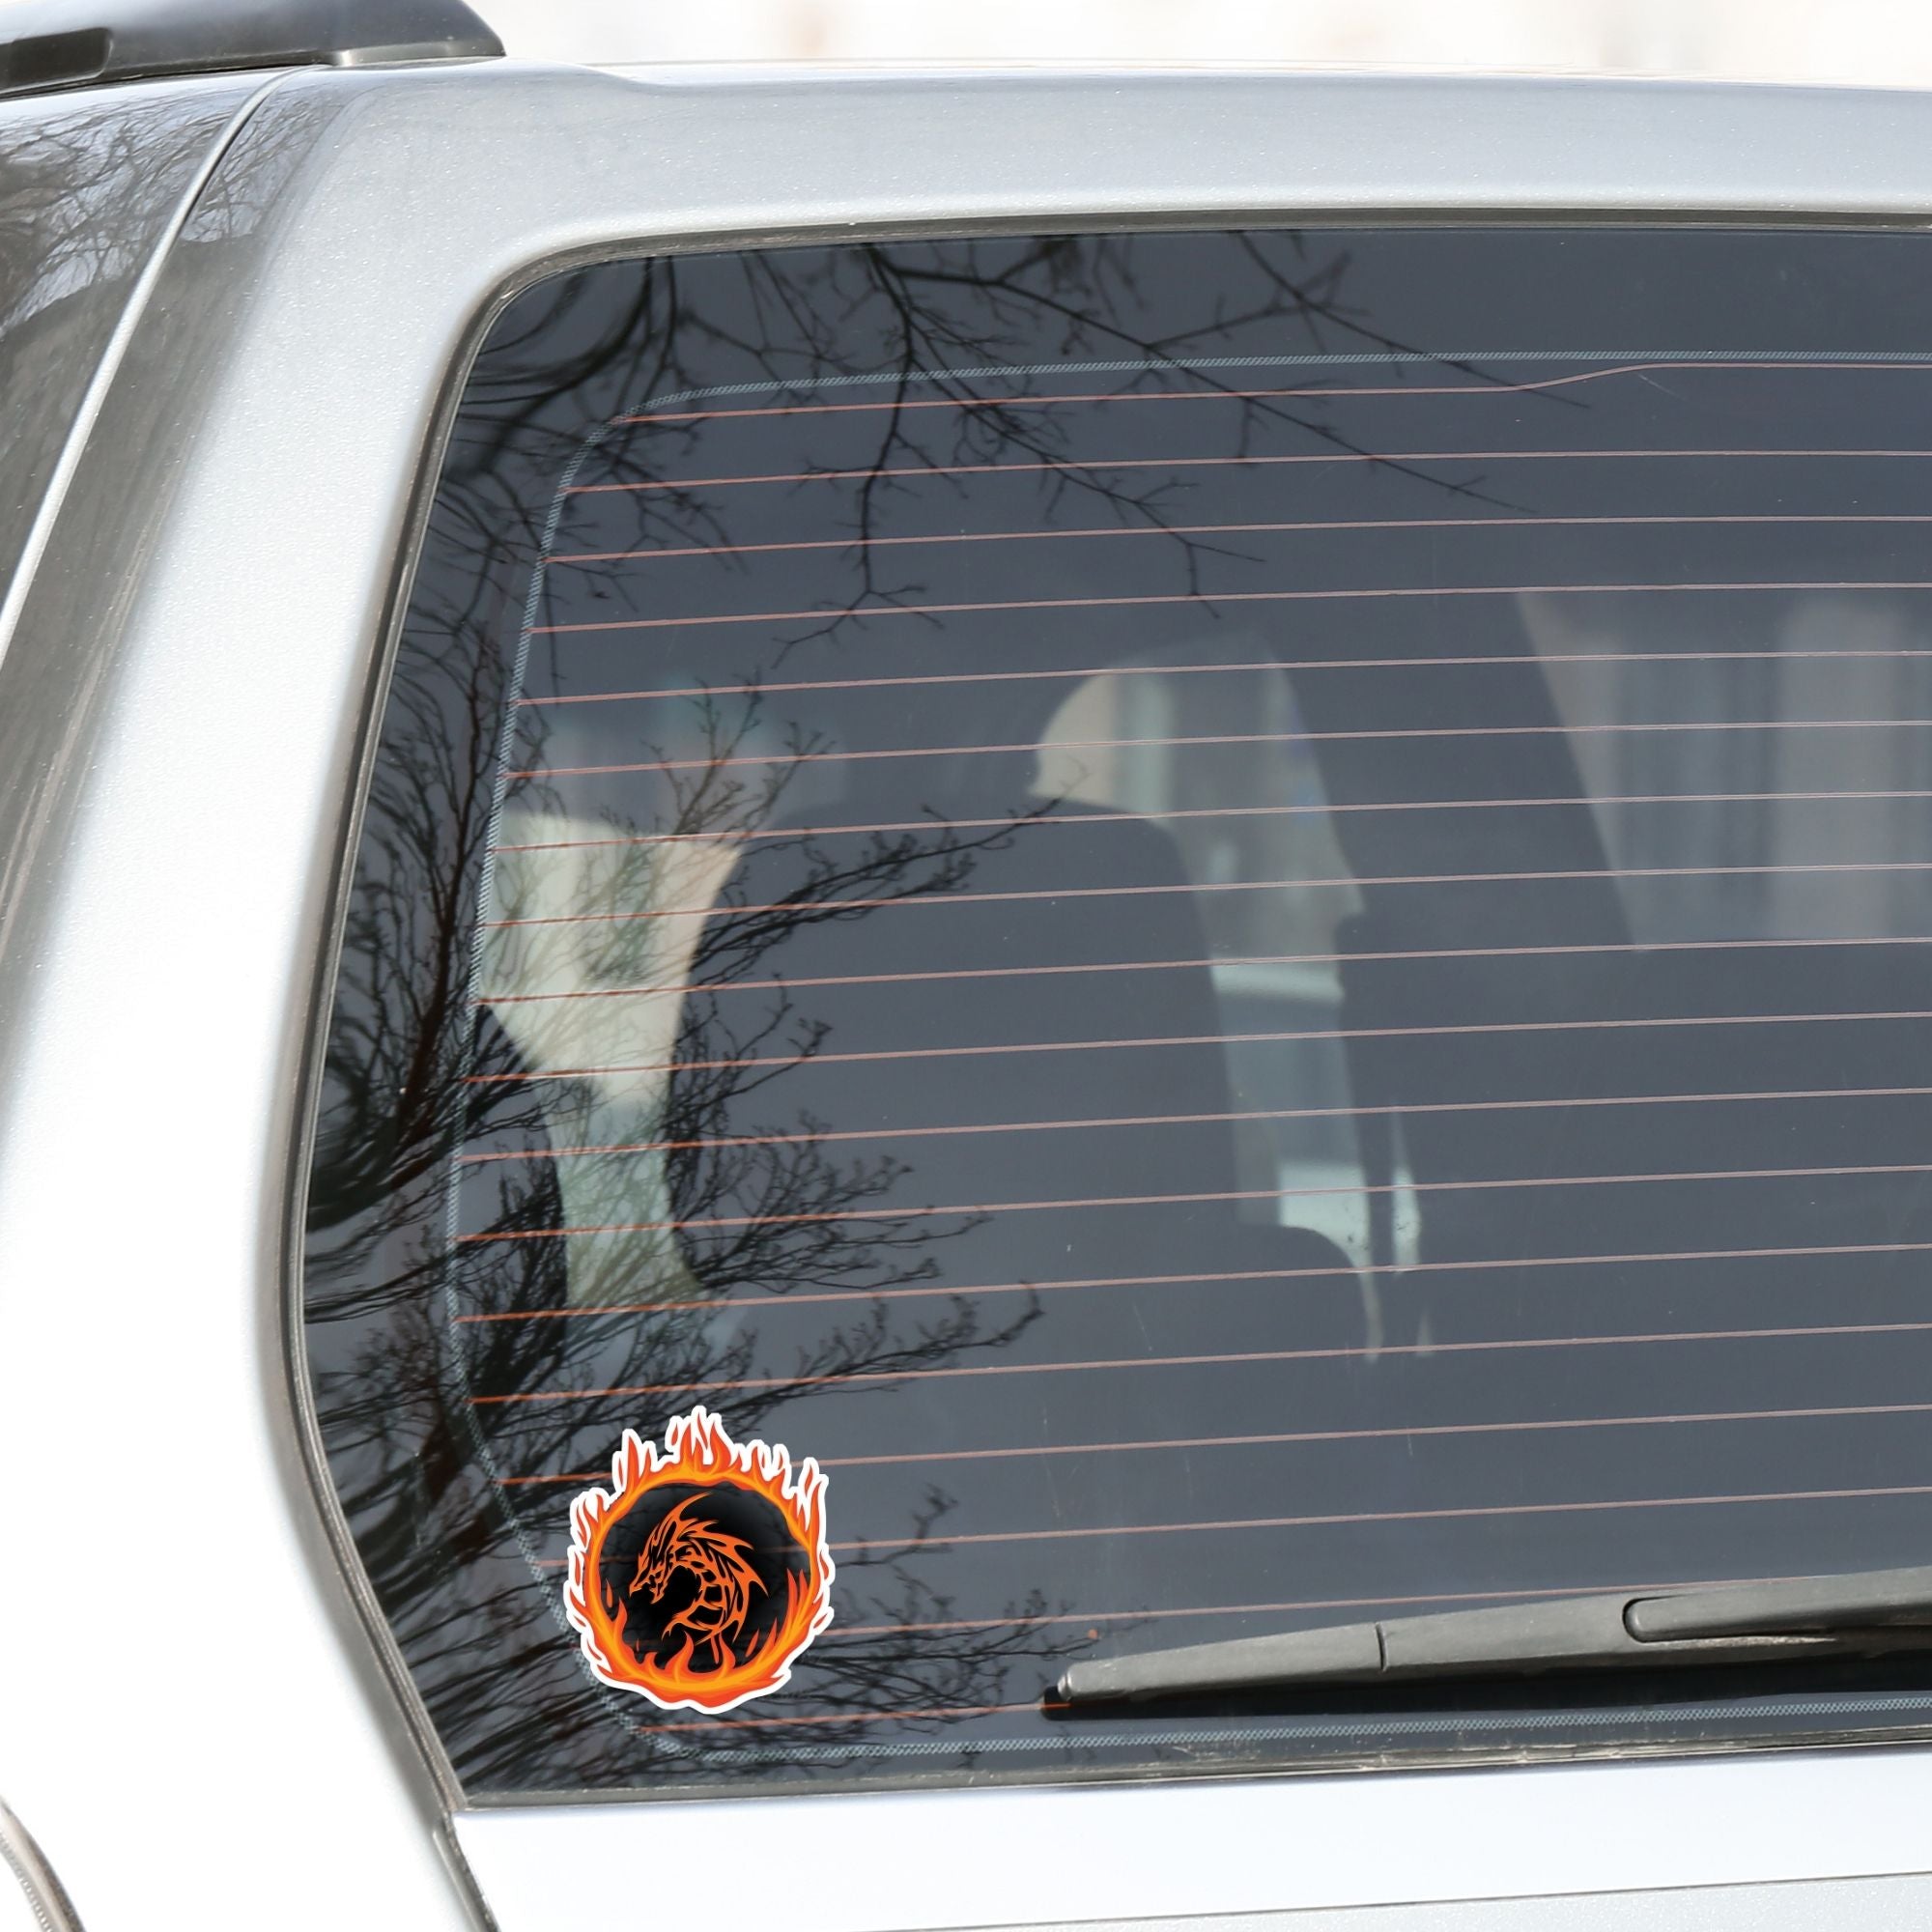 Who dares to disturb the Fire Dragon? This individual die-cut sticker features a fiery orange dragon surrounded by a ring of fire.  This image shows the Fire Dragon sticker on the back window of a car.